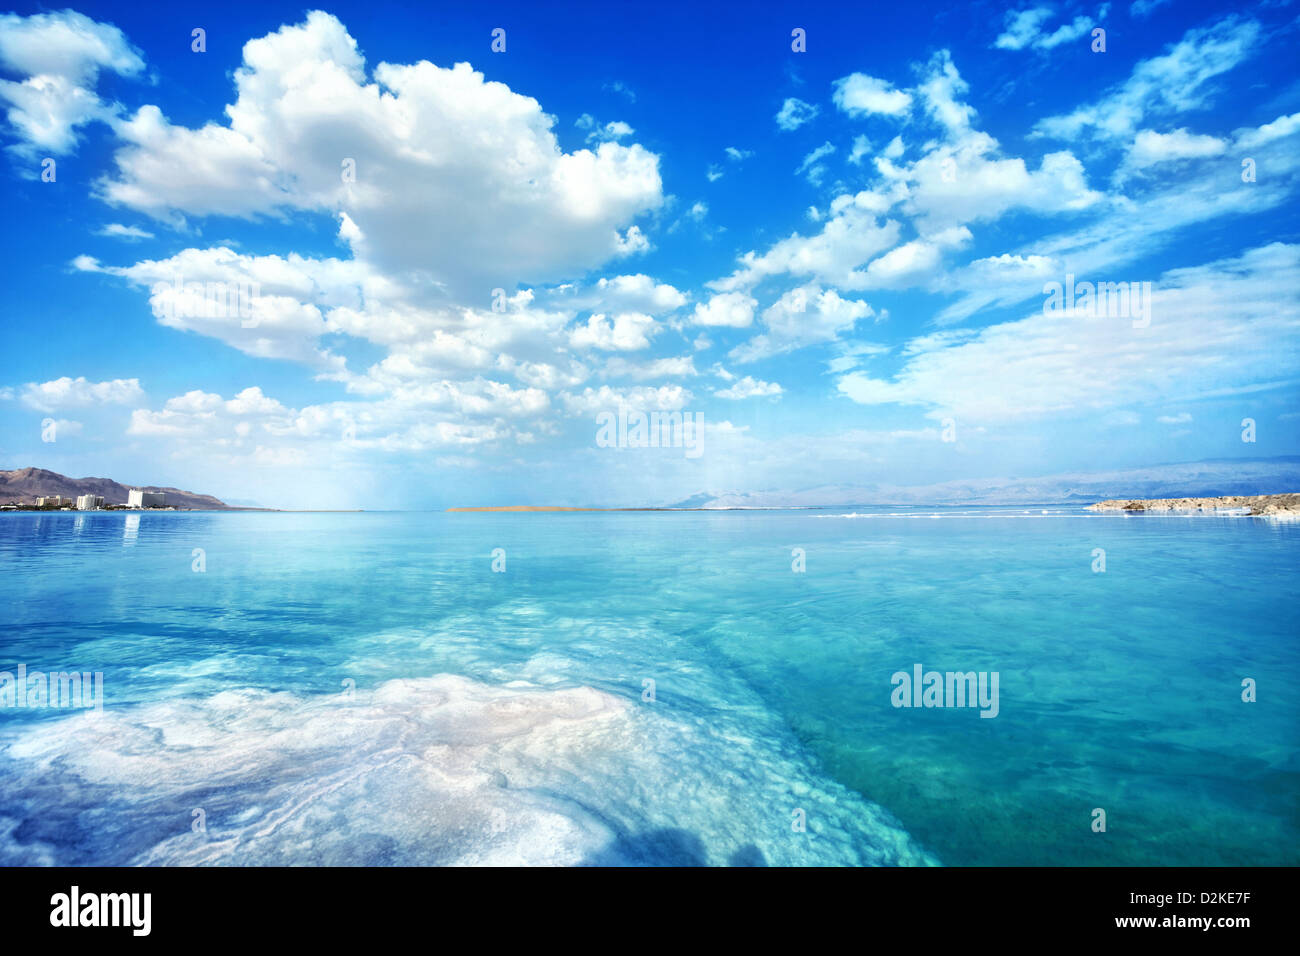 nice Dead Sea landscape on a summer day Stock Photo